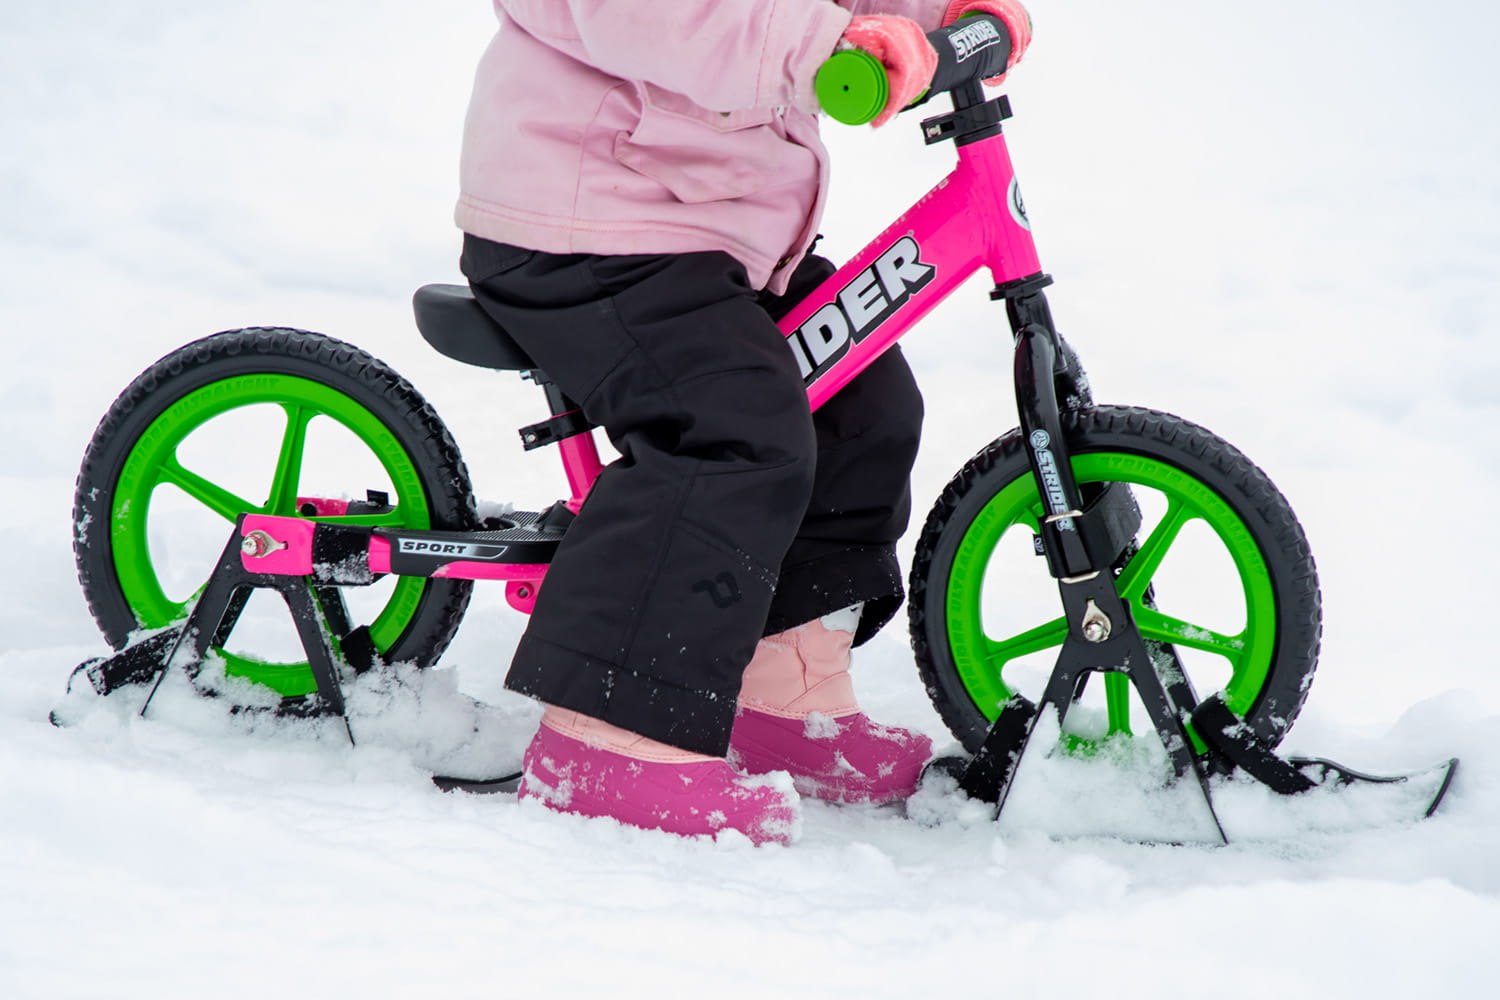 A closeup of Strider Snow Skis in use on a pink bike